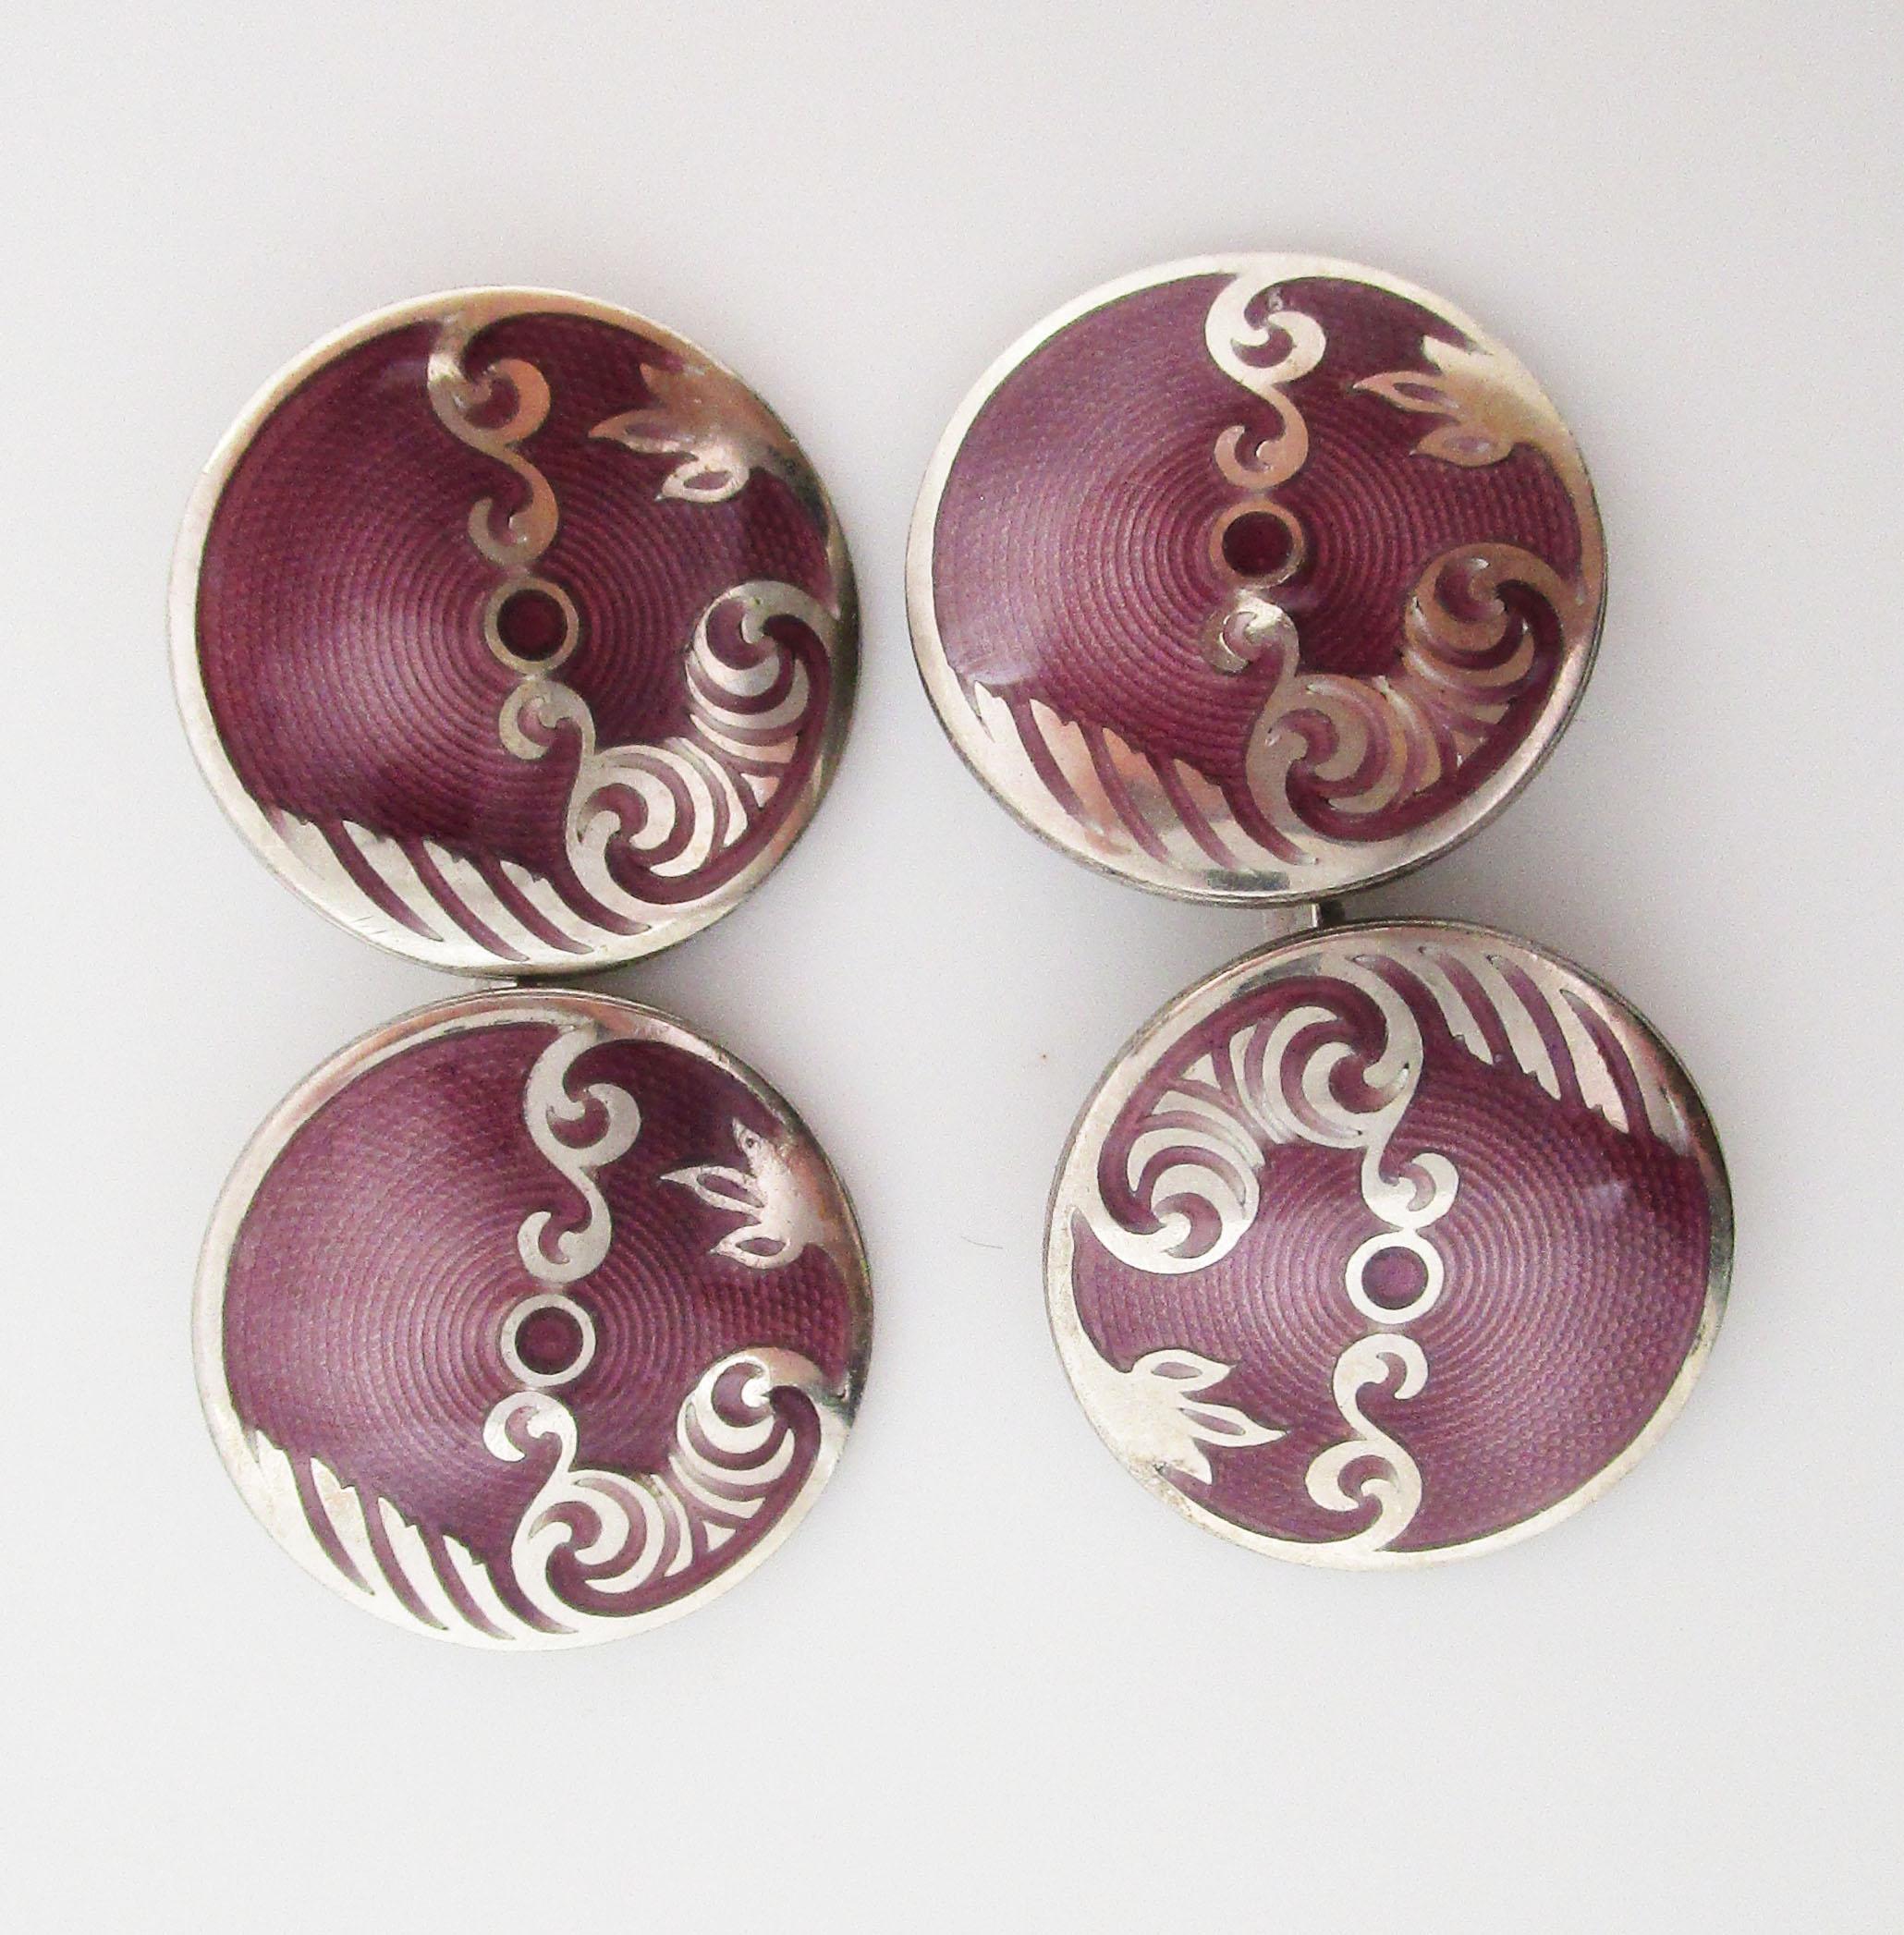 These elegant cufflinks feature a purely Art Deco design of arching curves in sterling silver accented by a rich shade of warm lavender that is incredibly unique! The links have a classic round shape, but what makes this set special is the finely